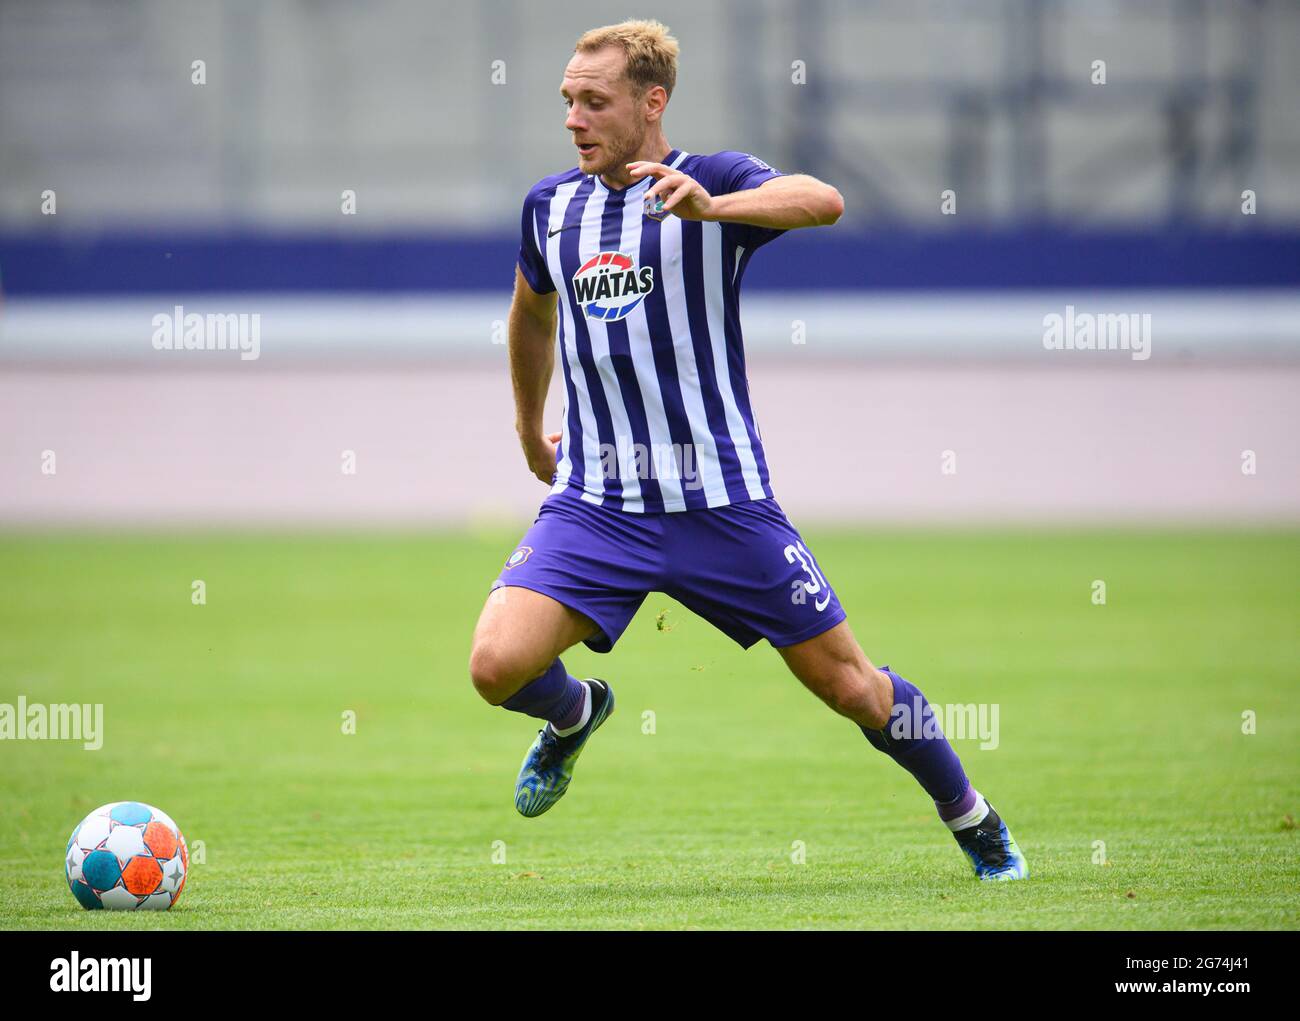 Aue, Germany. 10th July, 2021. Football: Test match, FC Erzgebirge Aue - 1. FC Magdeburg, at Erzgebirge Stadium. Aue's Ben Zolinski plays the ball. Credit: Robert Michael/dpa-Zentralbild/dpa - IMPORTANT NOTE: In accordance with the regulations of the DFL Deutsche Fußball Liga and/or the DFB Deutscher Fußball-Bund, it is prohibited to use or have used photographs taken in the stadium and/or of the match in the form of sequence pictures and/or video-like photo series./dpa/Alamy Live News Stock Photo